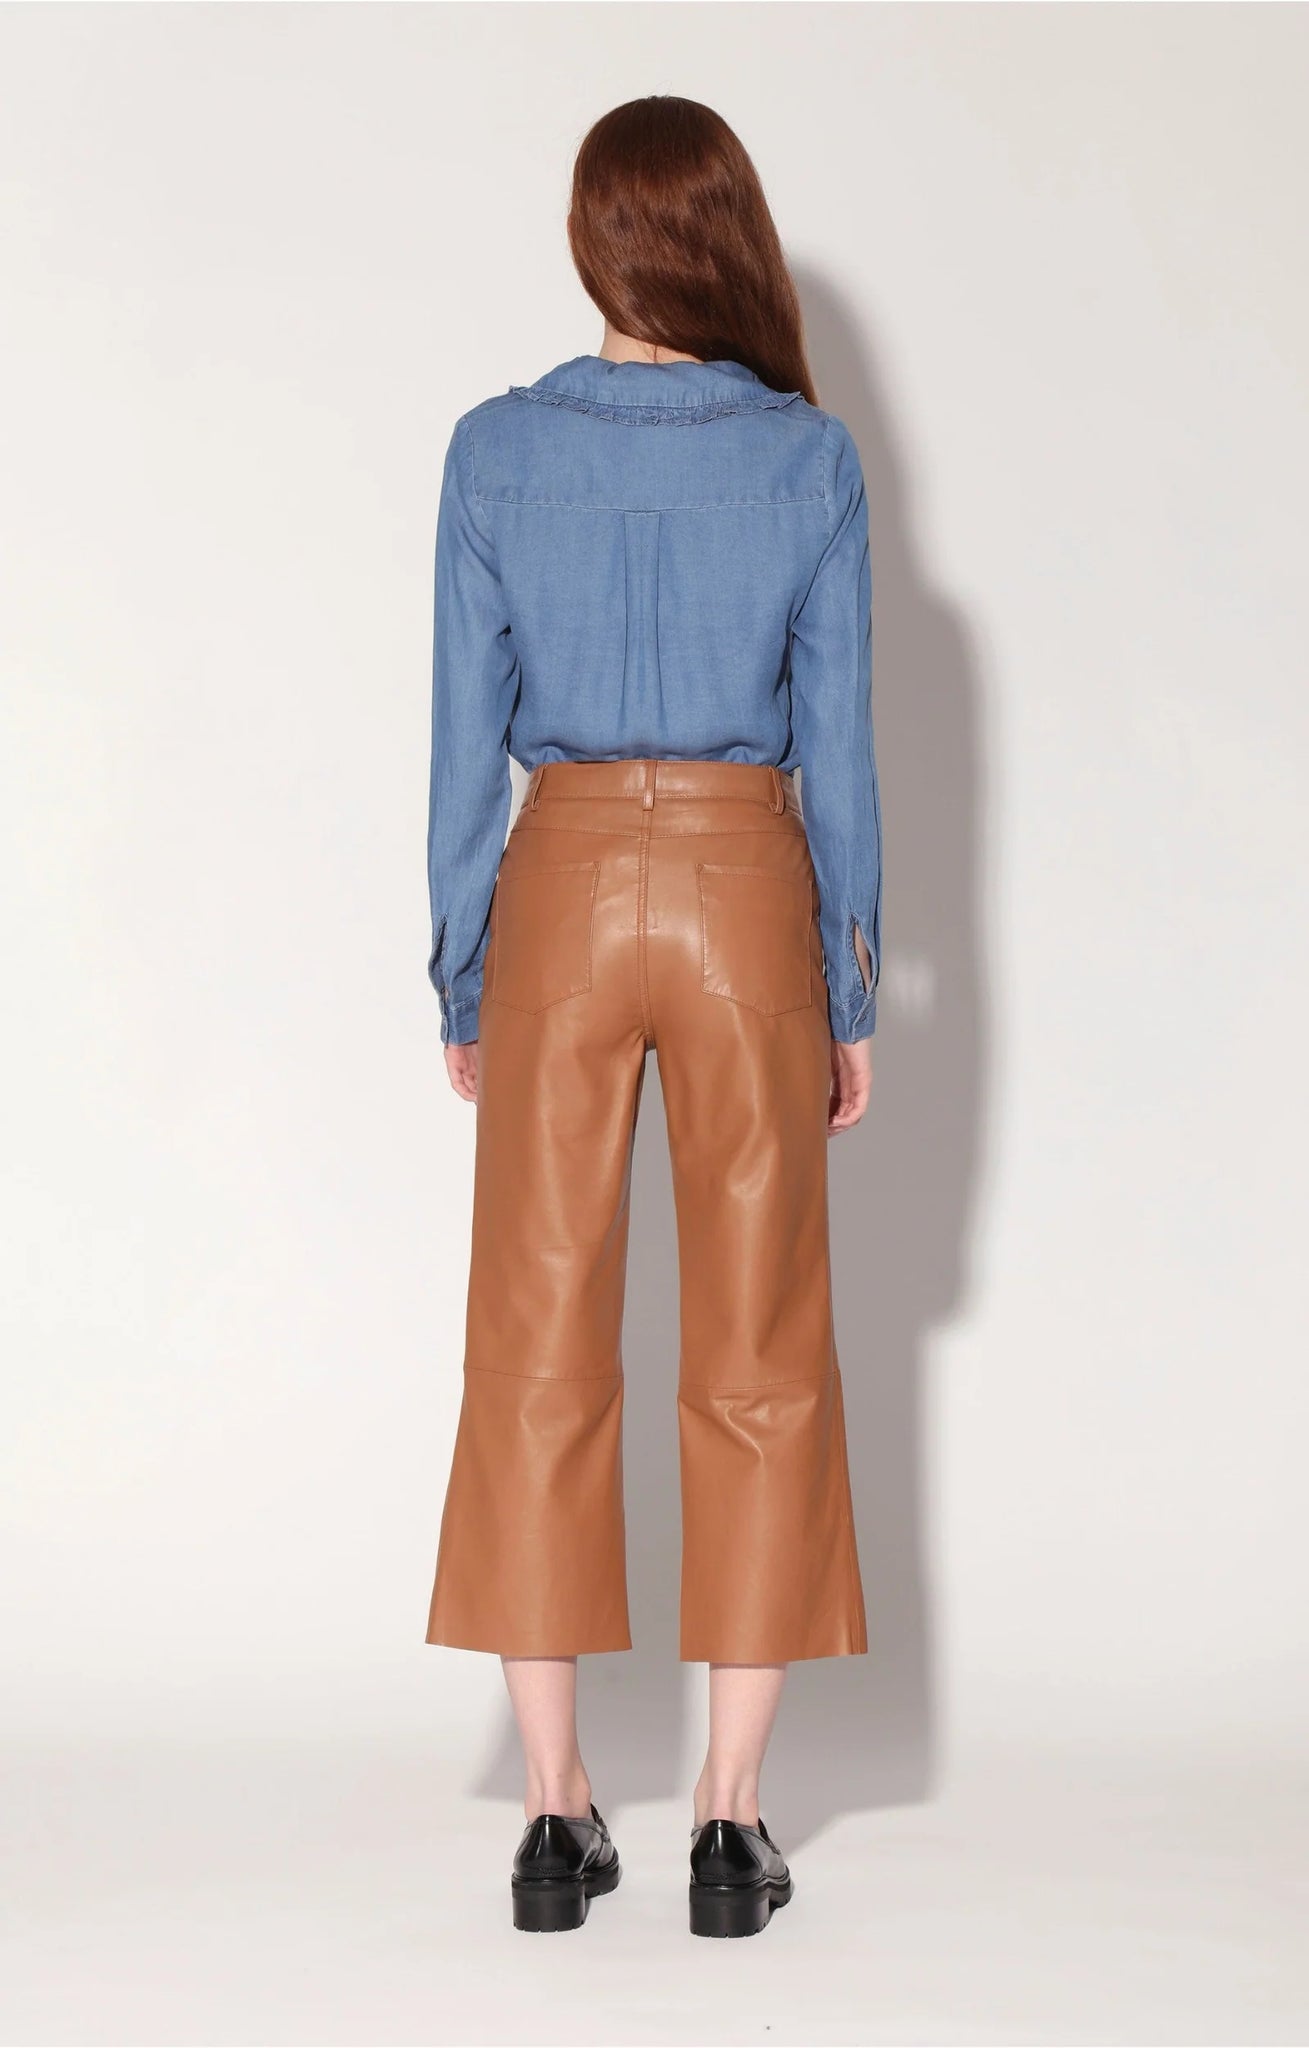 Walter Baker Venice Leather Pant in Camel